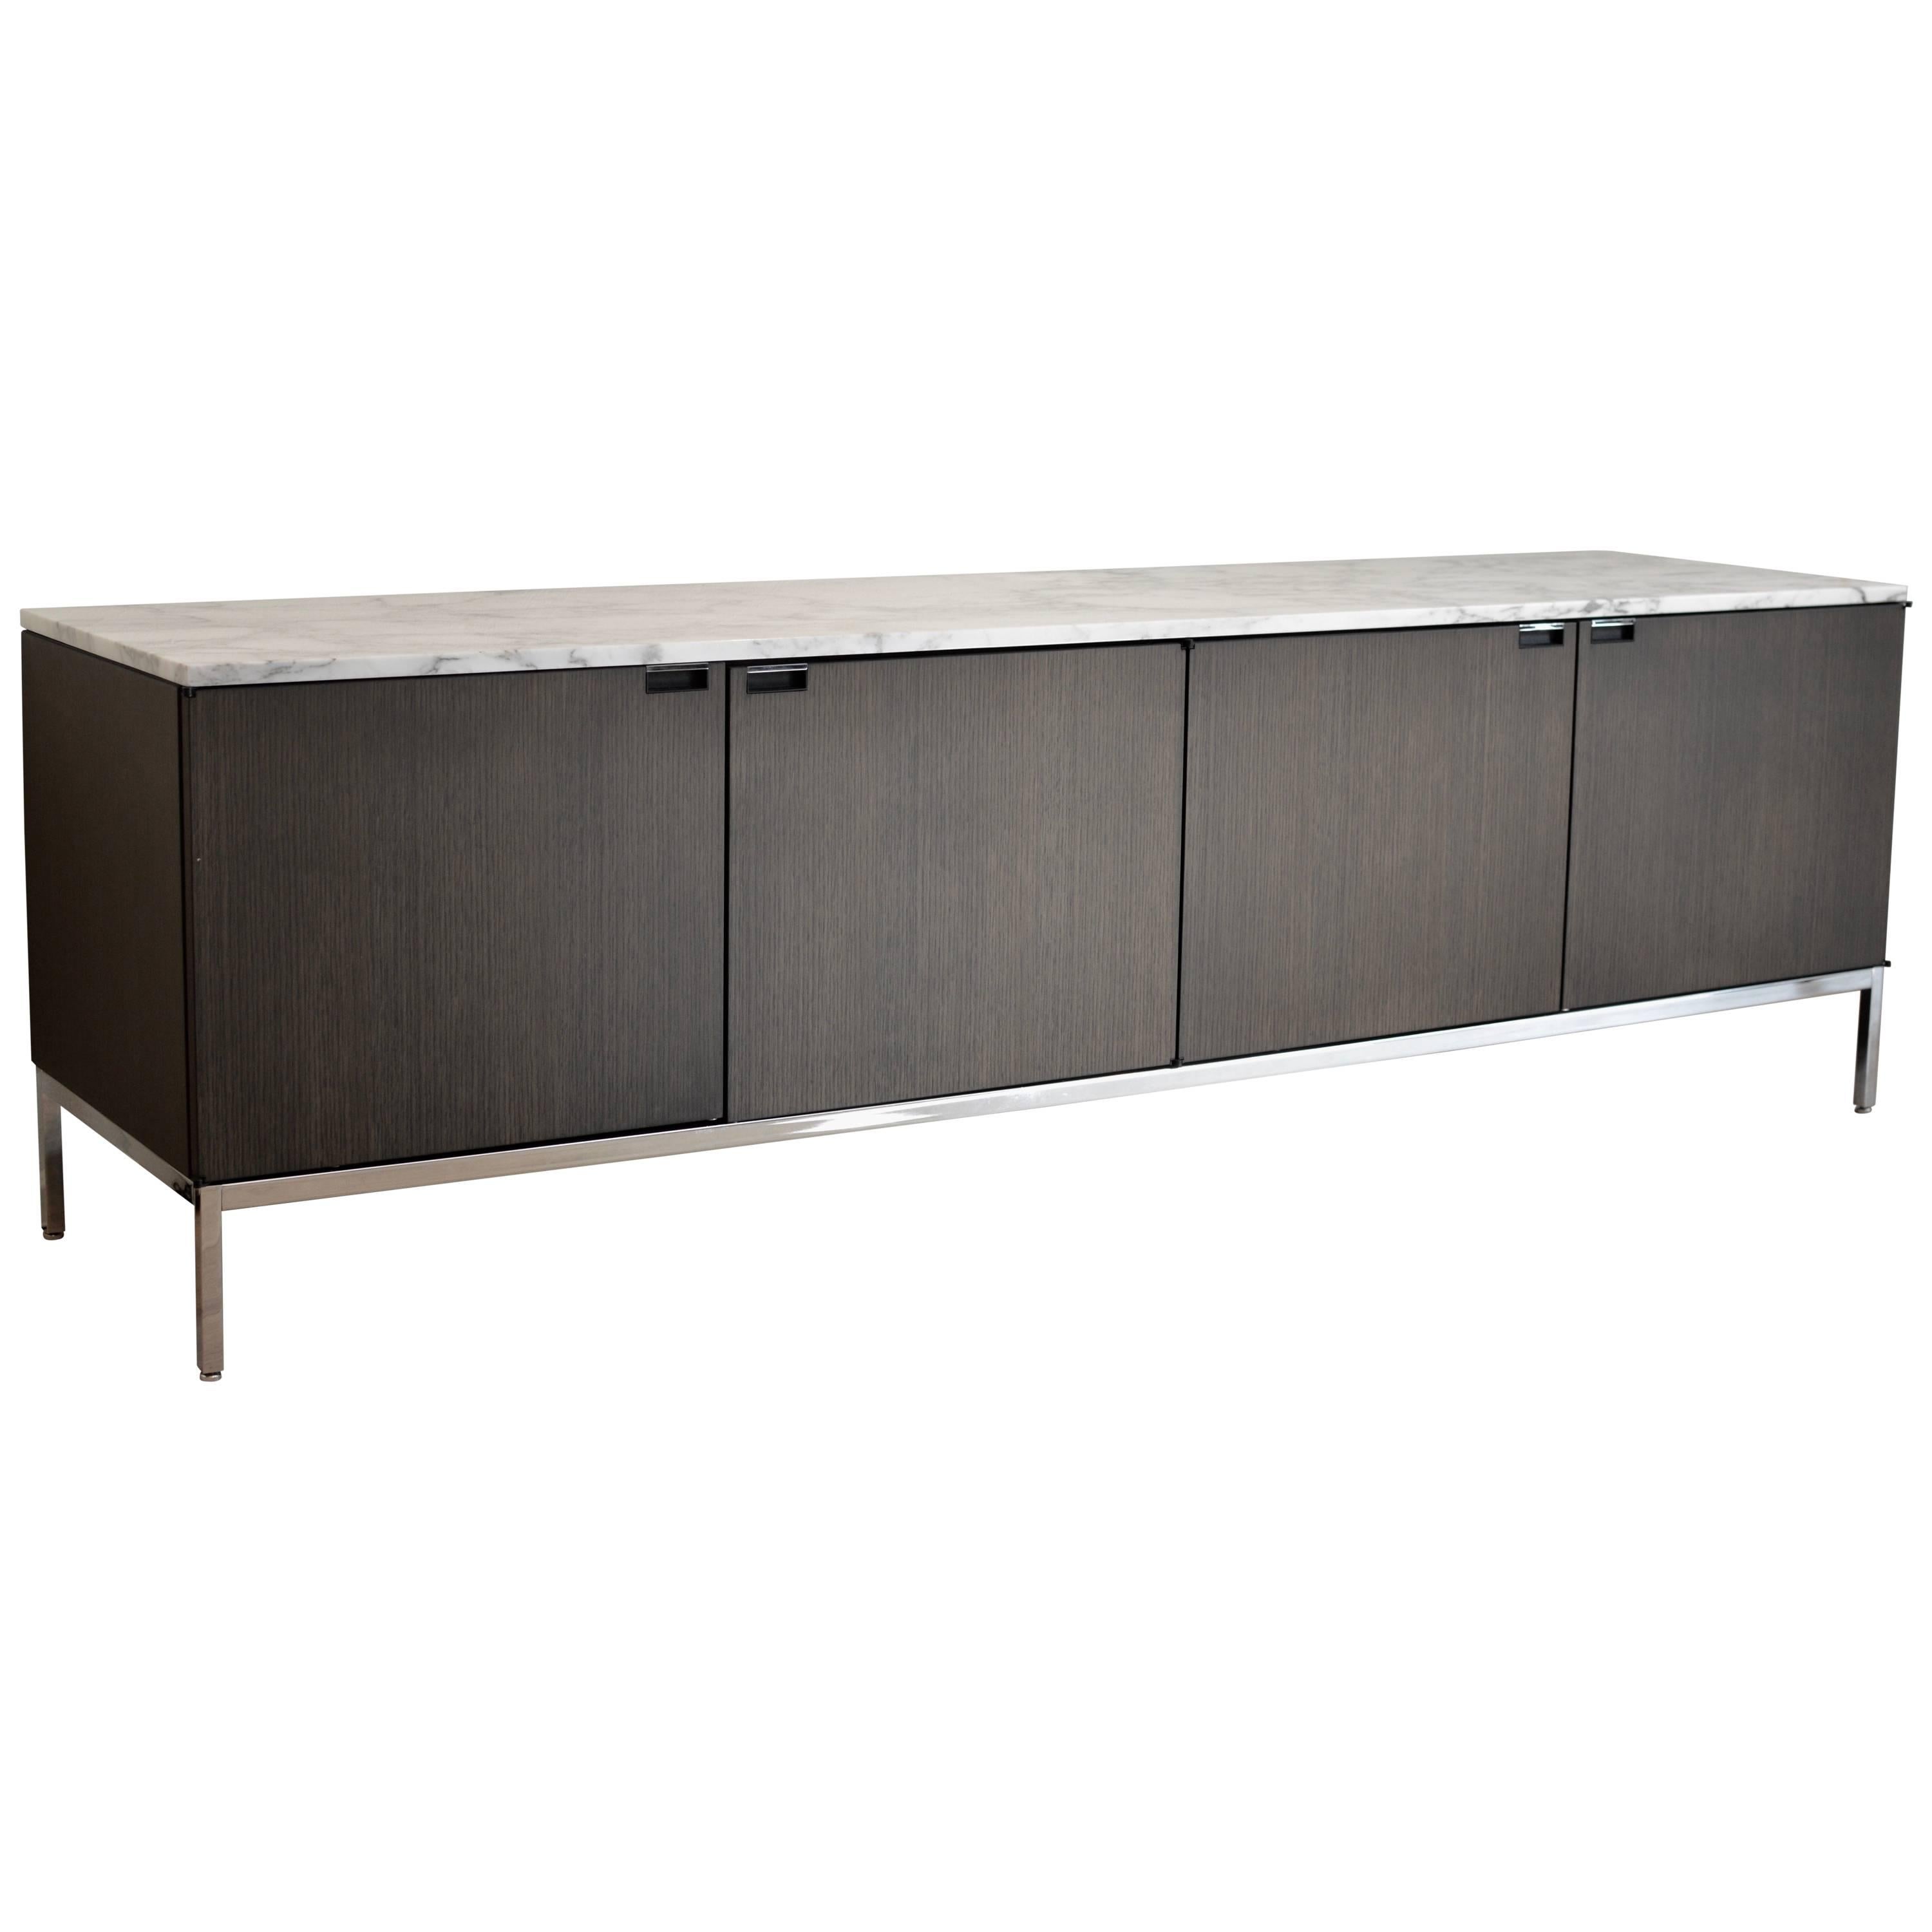 Florence Knoll Credenza New Edition Grey Oak and Arabescato Marble-Top